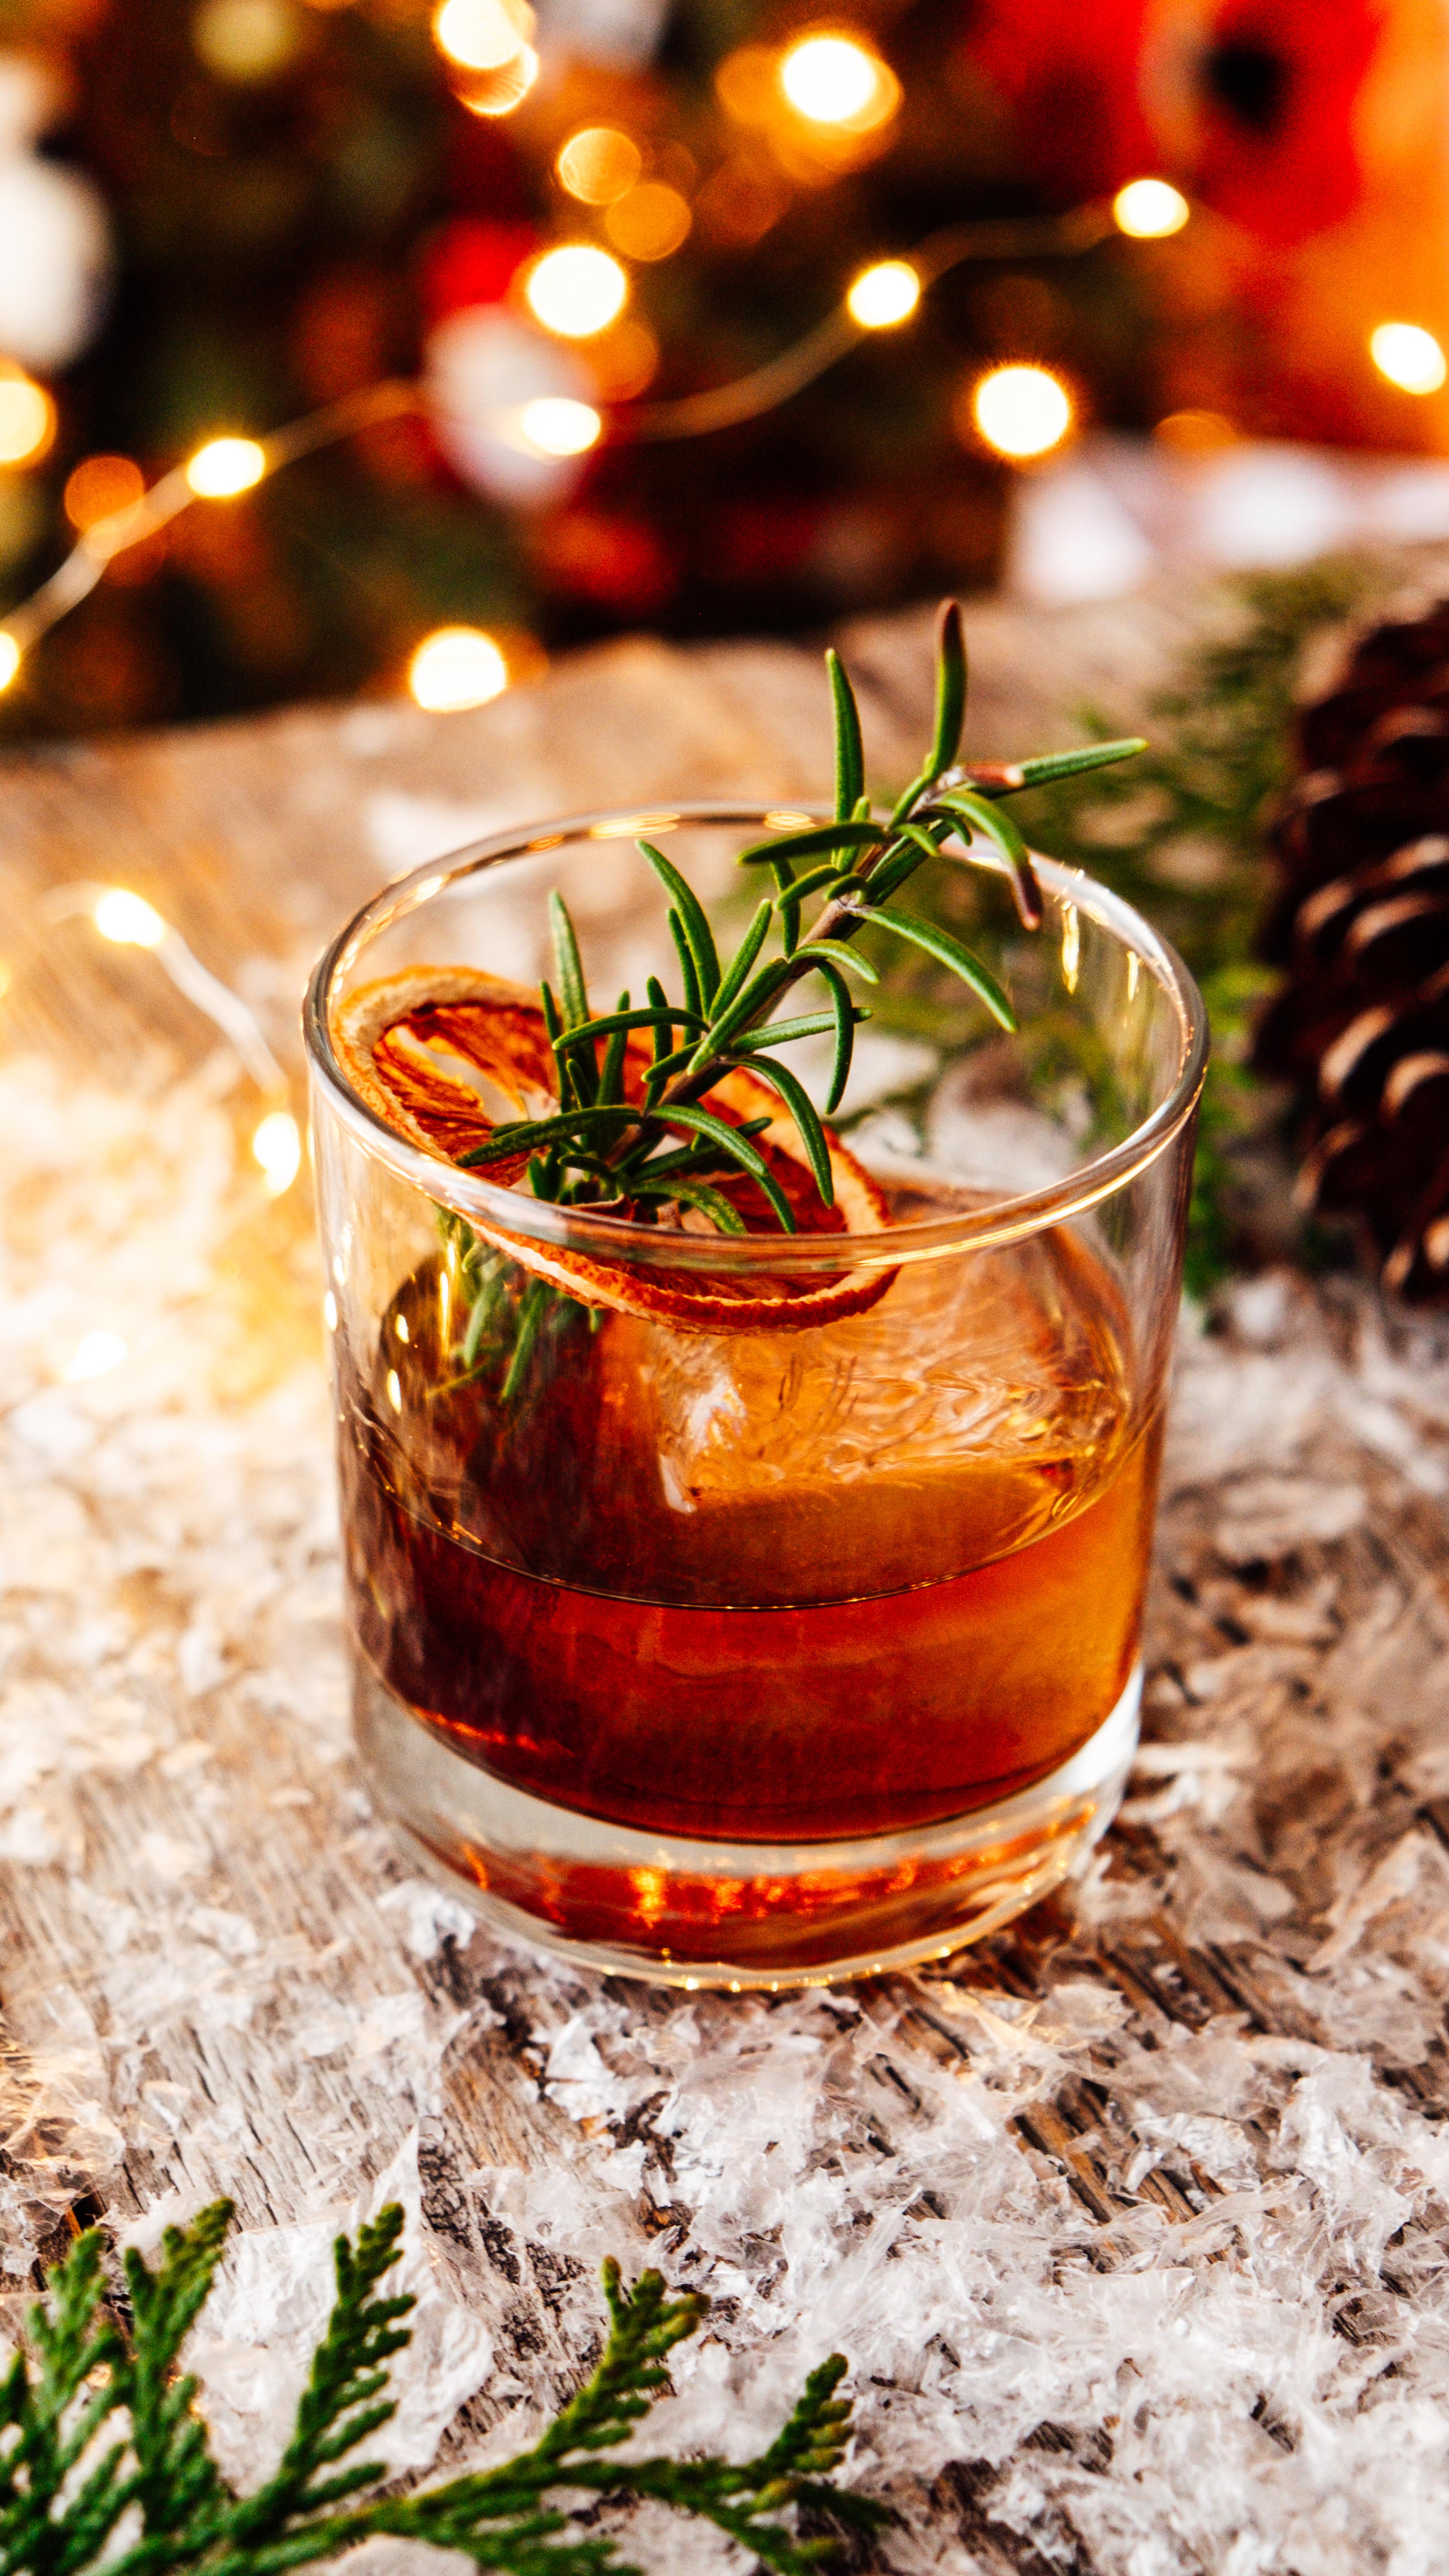 https://www.alifewellconsumed.com/wp-content/uploads/2020/12/winter-old-fashioned-cocktail-recipe-6.jpg